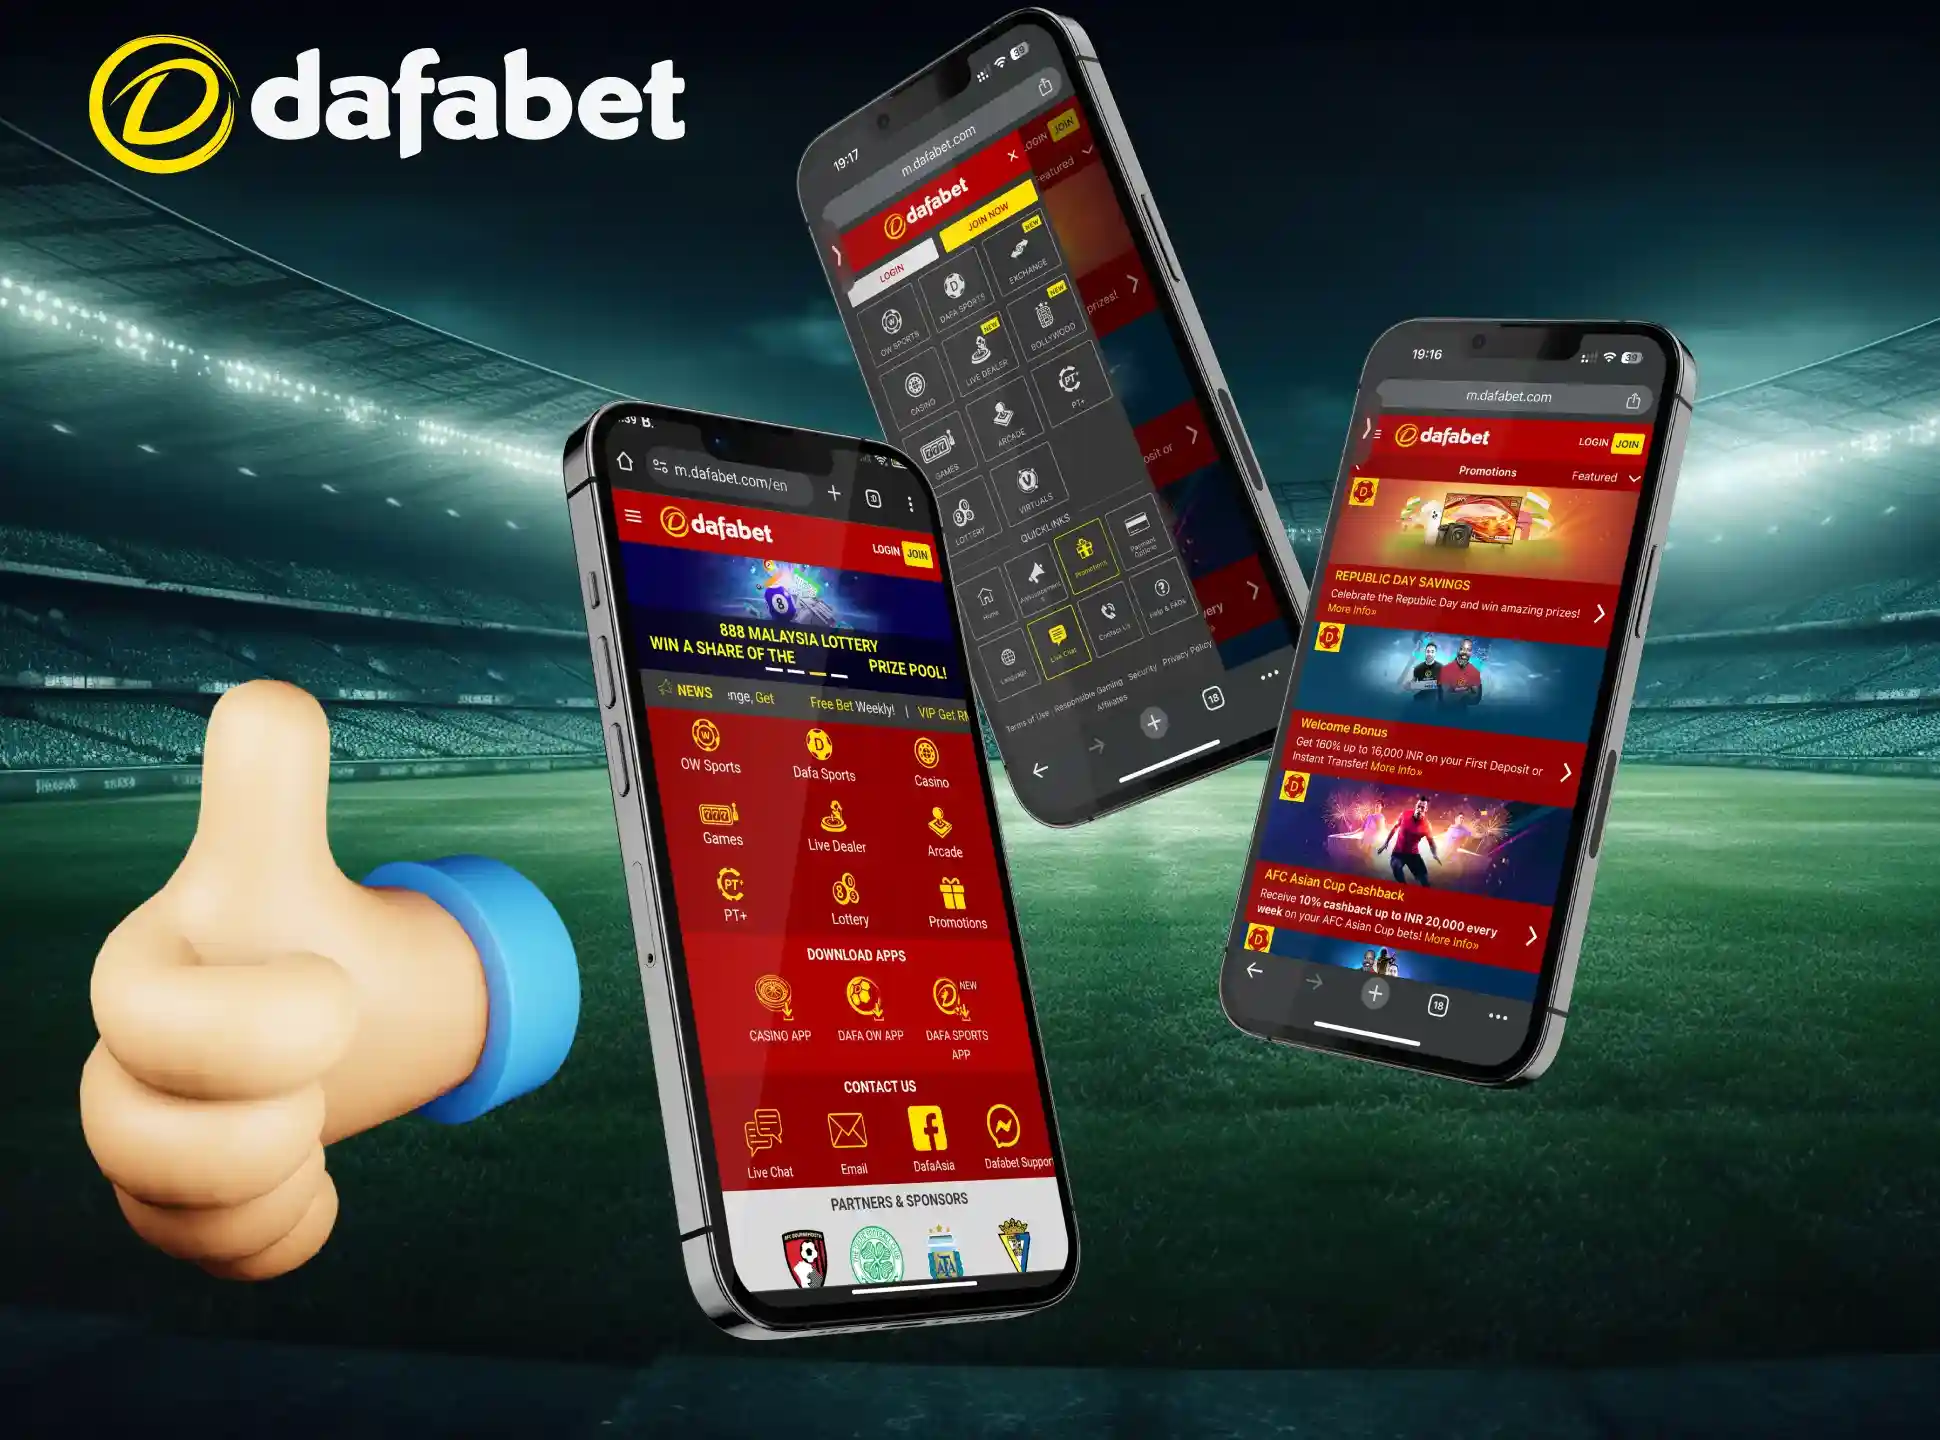 The Dafabet app guarantees enjoyable betting and security for Indian users.